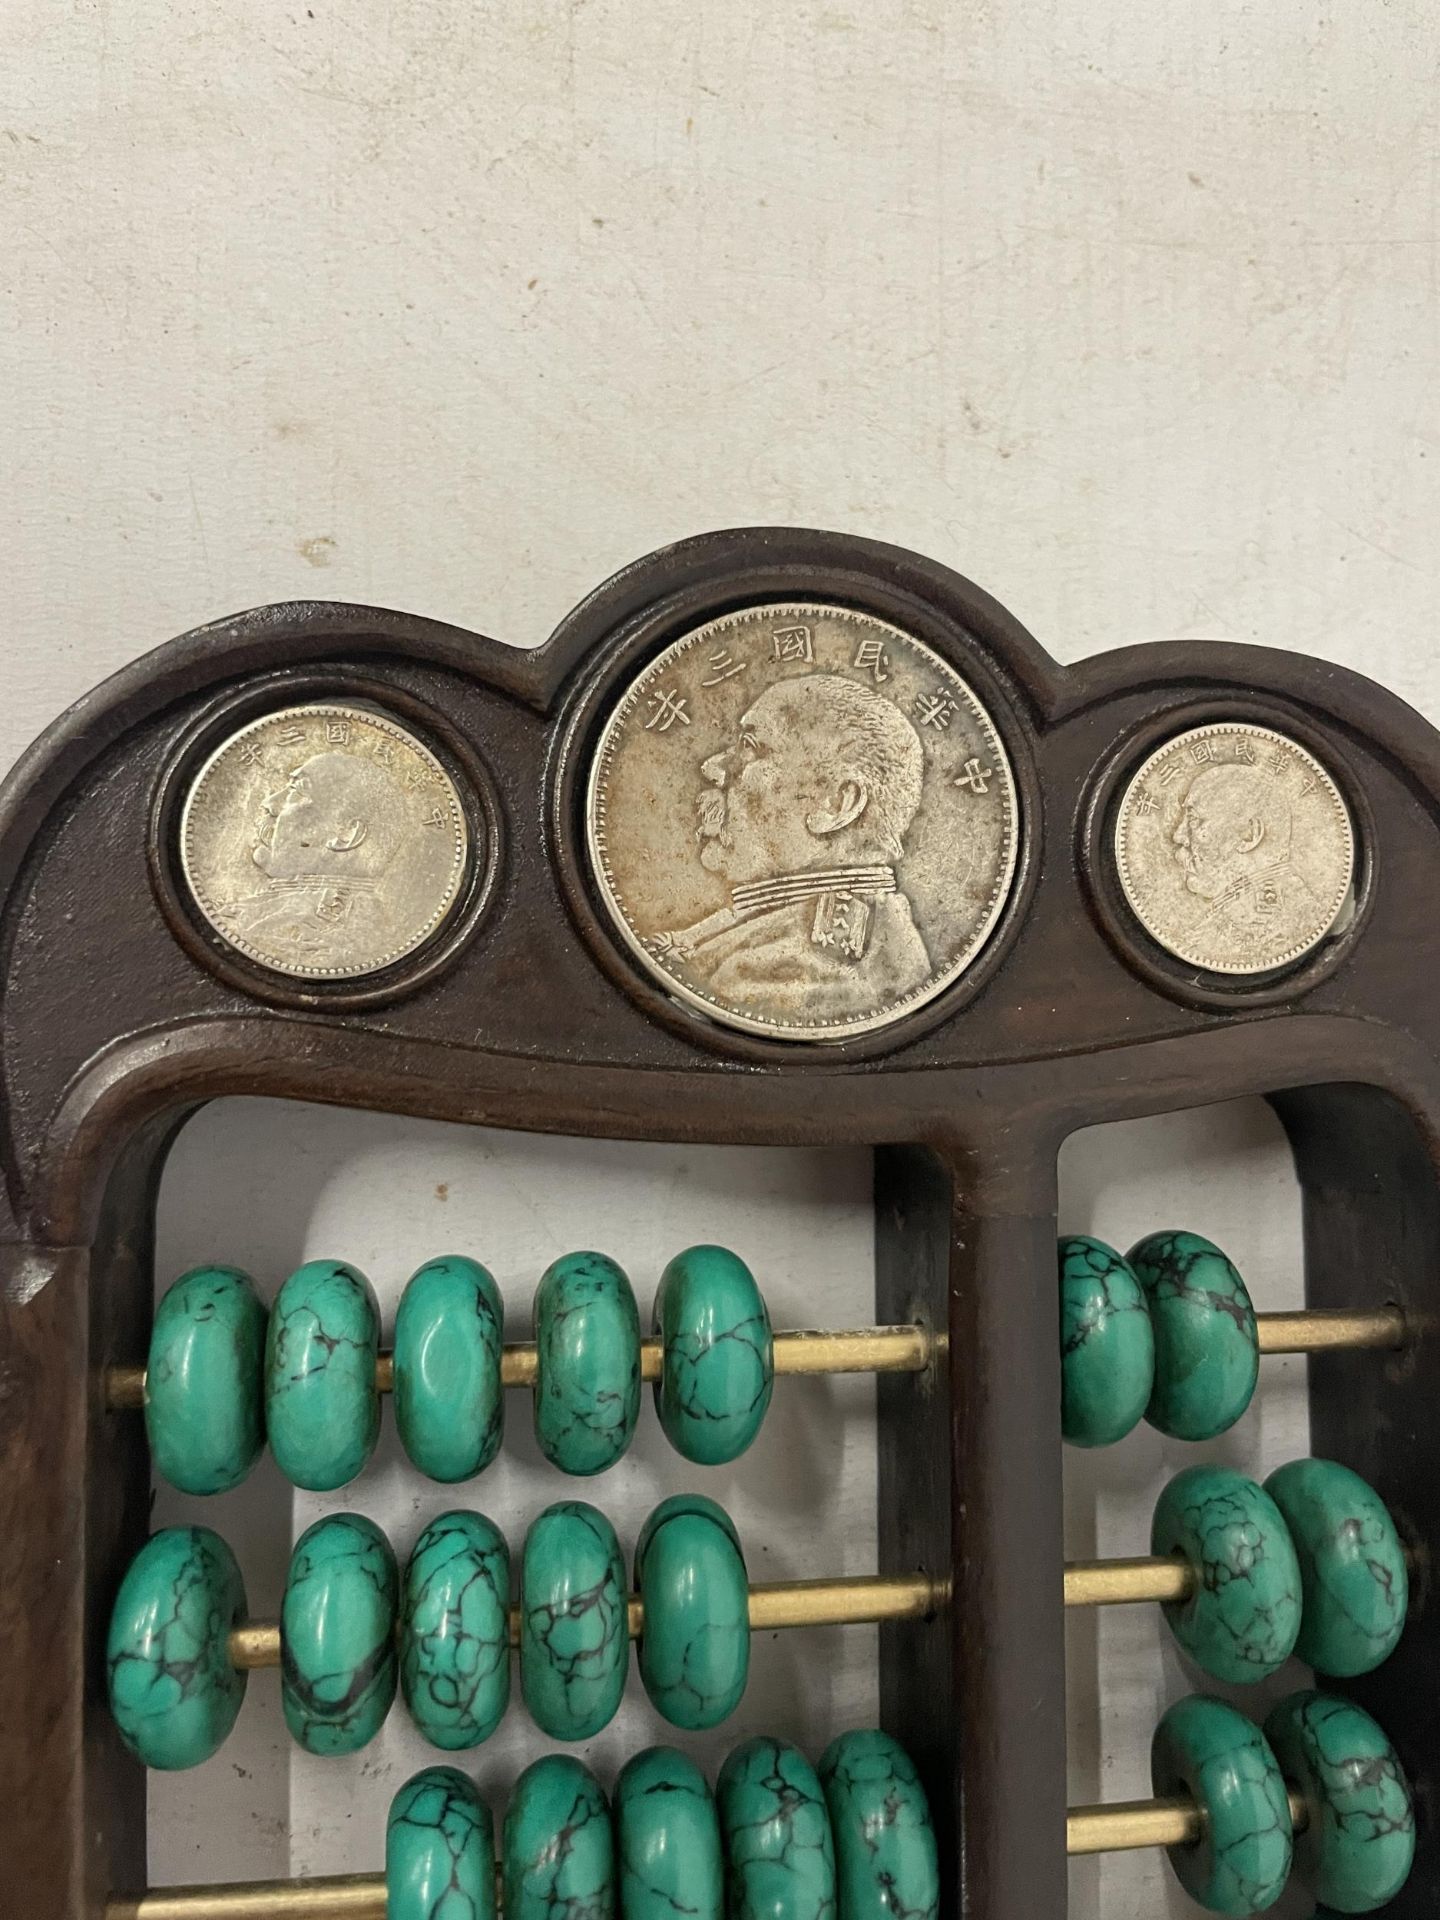 A CHINESE ABACUS WITH MALACHITE COUNTERS AND SILVER COINS - Image 3 of 3